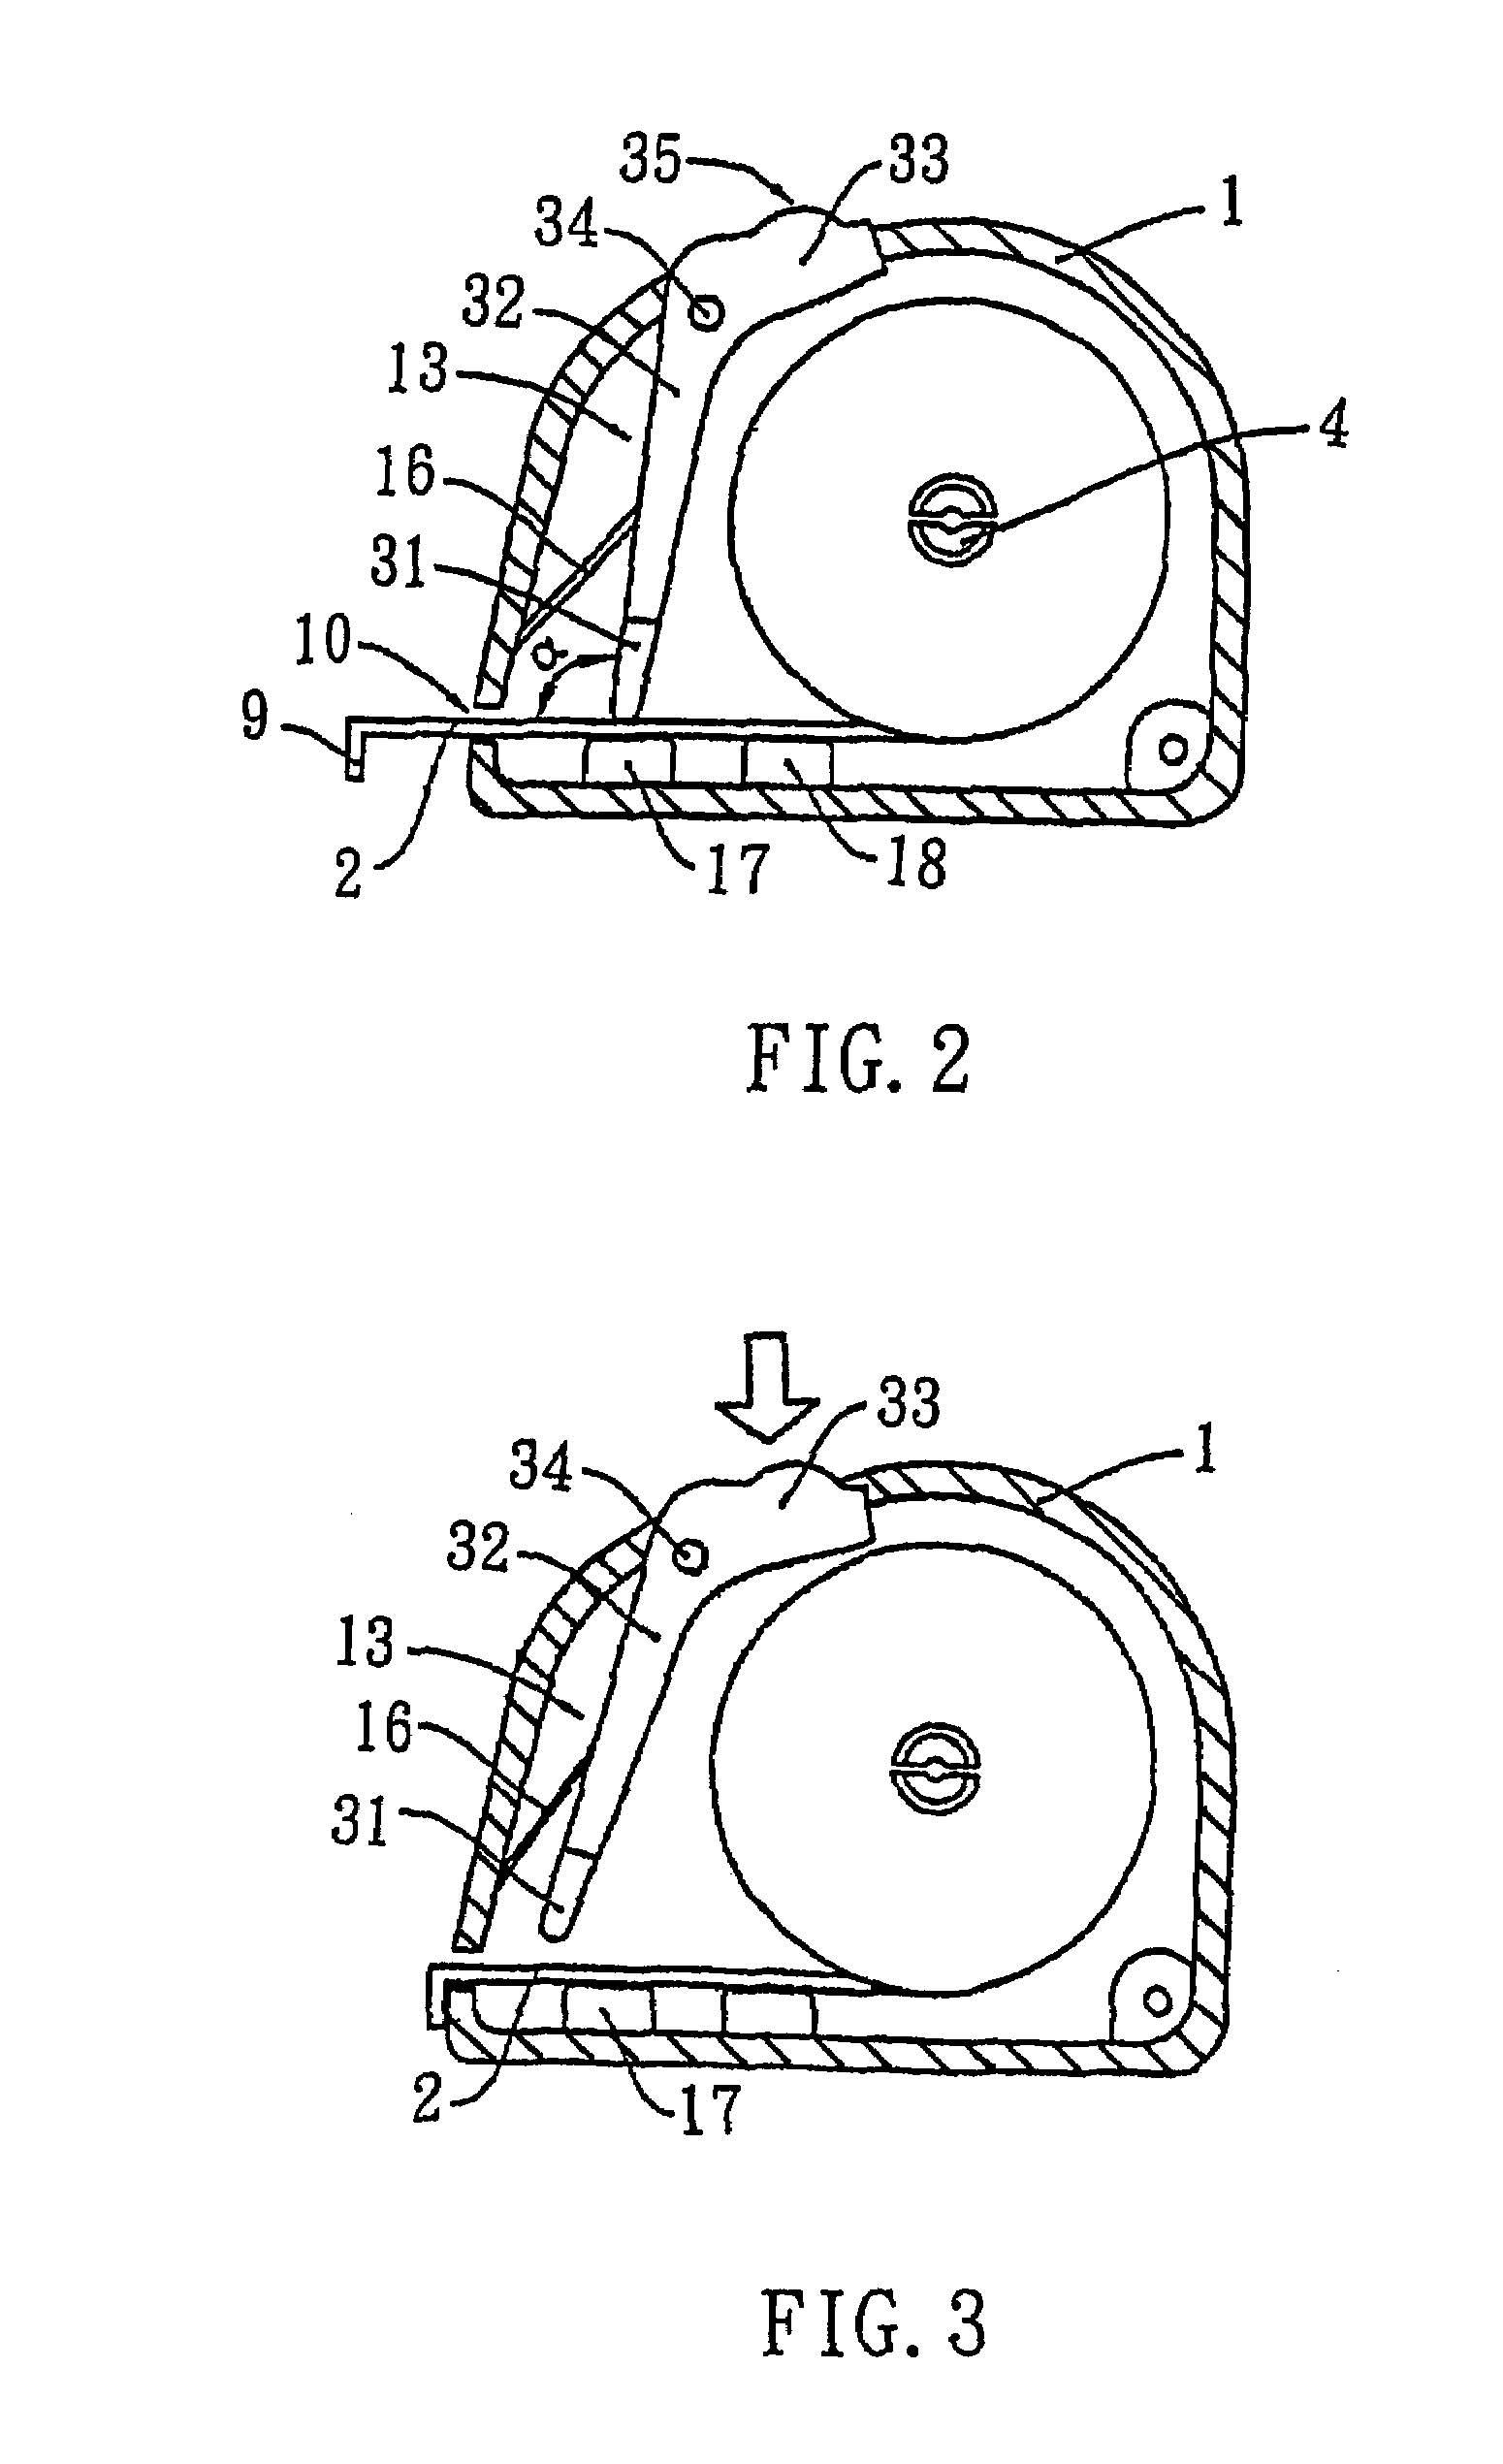 Automatic locking mechanism for a measuring tape device